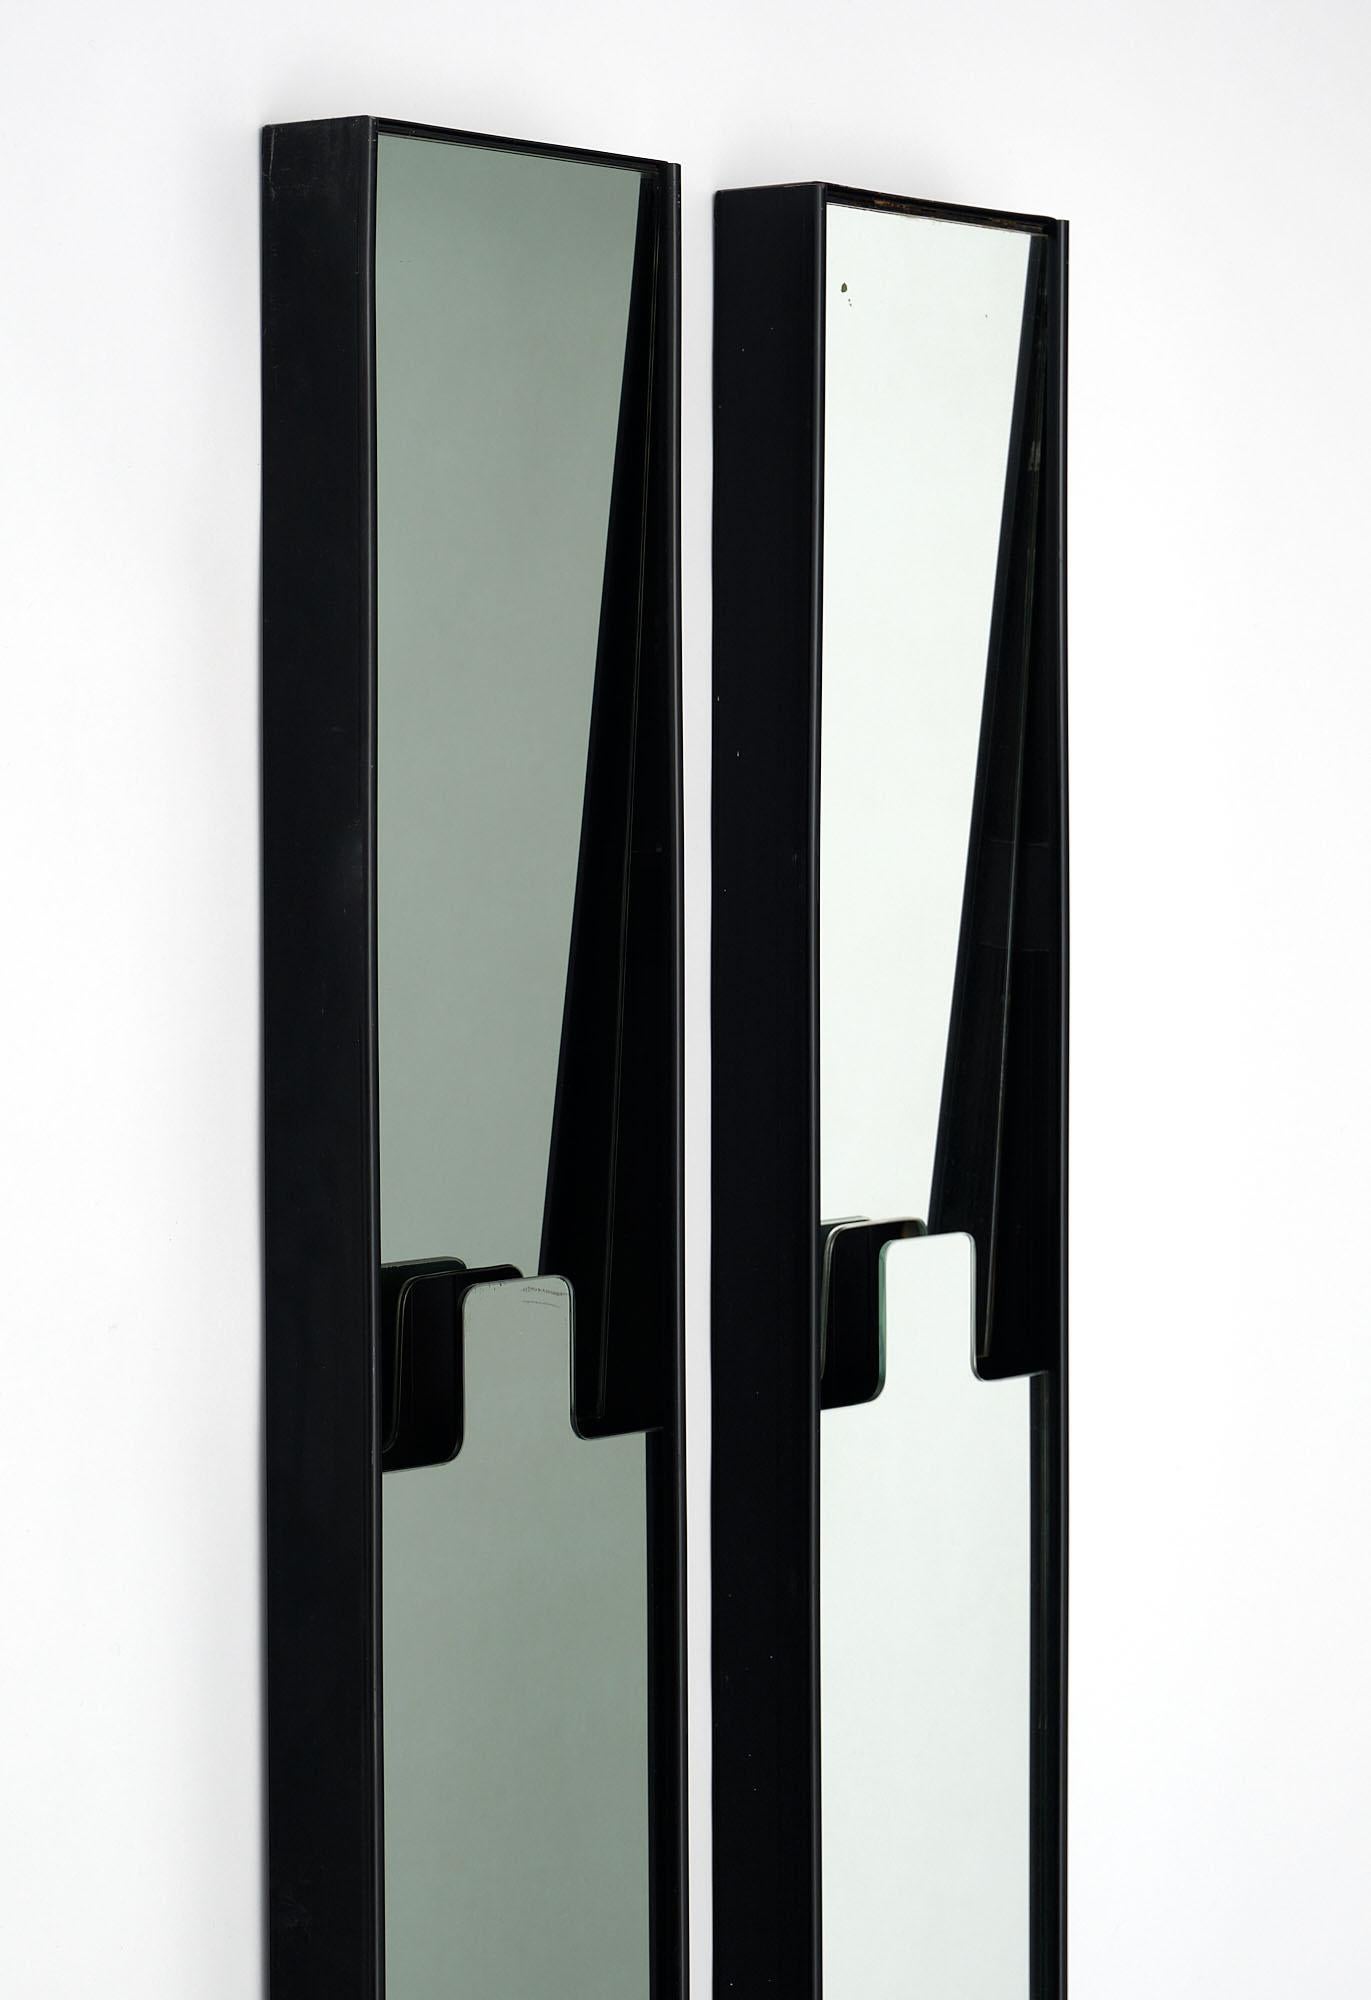 Set of six “Gronda” mirrors/coat racks by Luciano Bertoncini for Elco. The upper part of each module can be pushed back to become a coat hanger. Three have a smoked glass finish. They can be mixed and matched together in different ways.